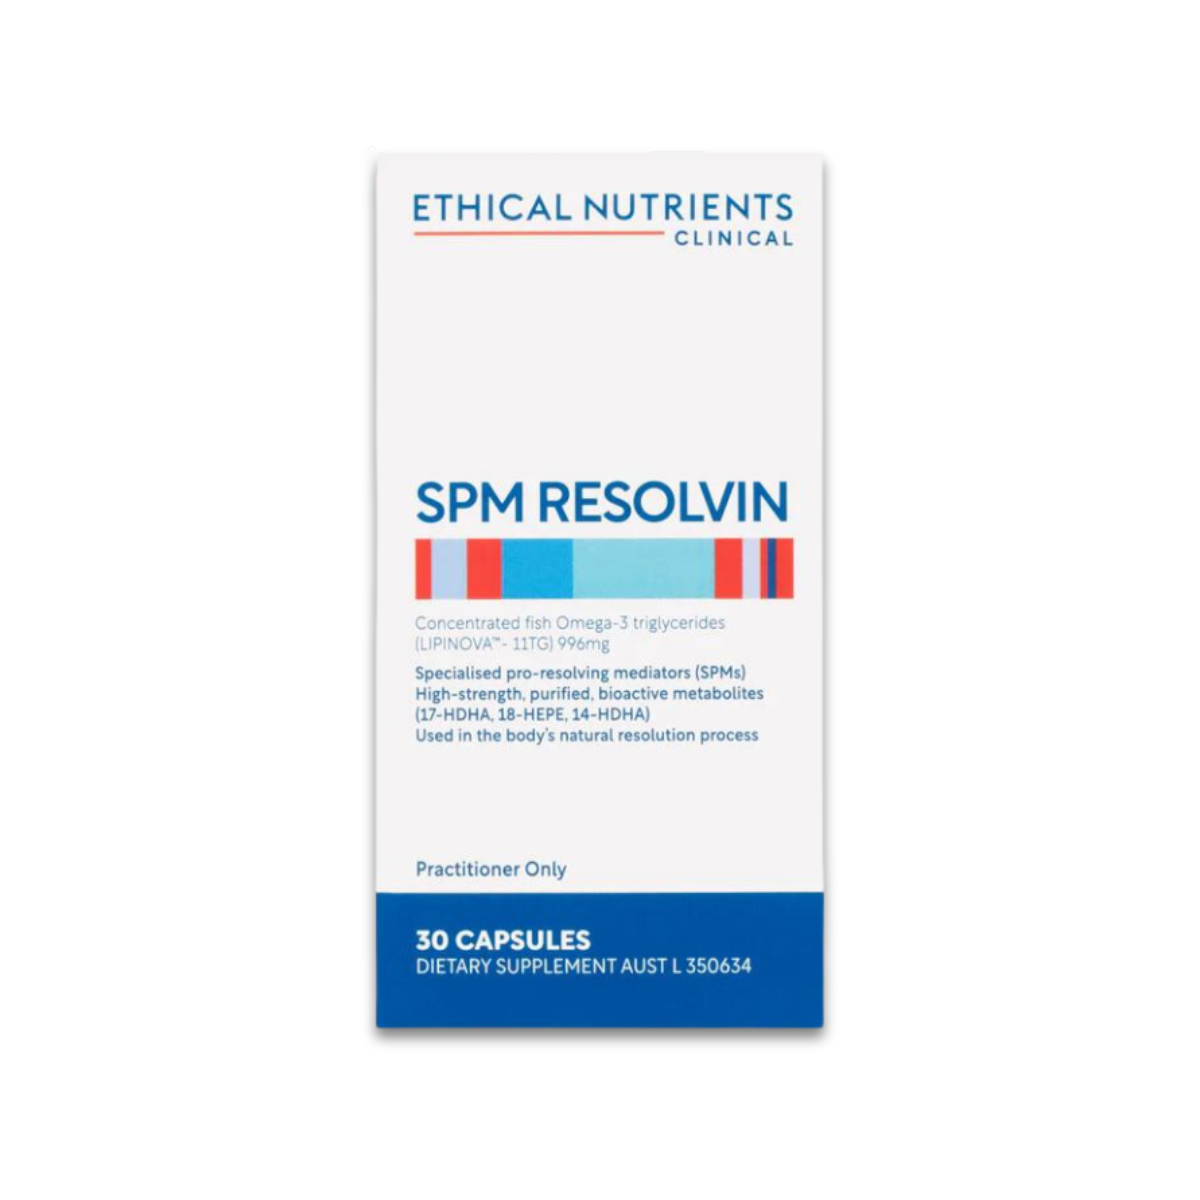 Ethical Nutrients Clinical SPM Resolvin 30 Capsules